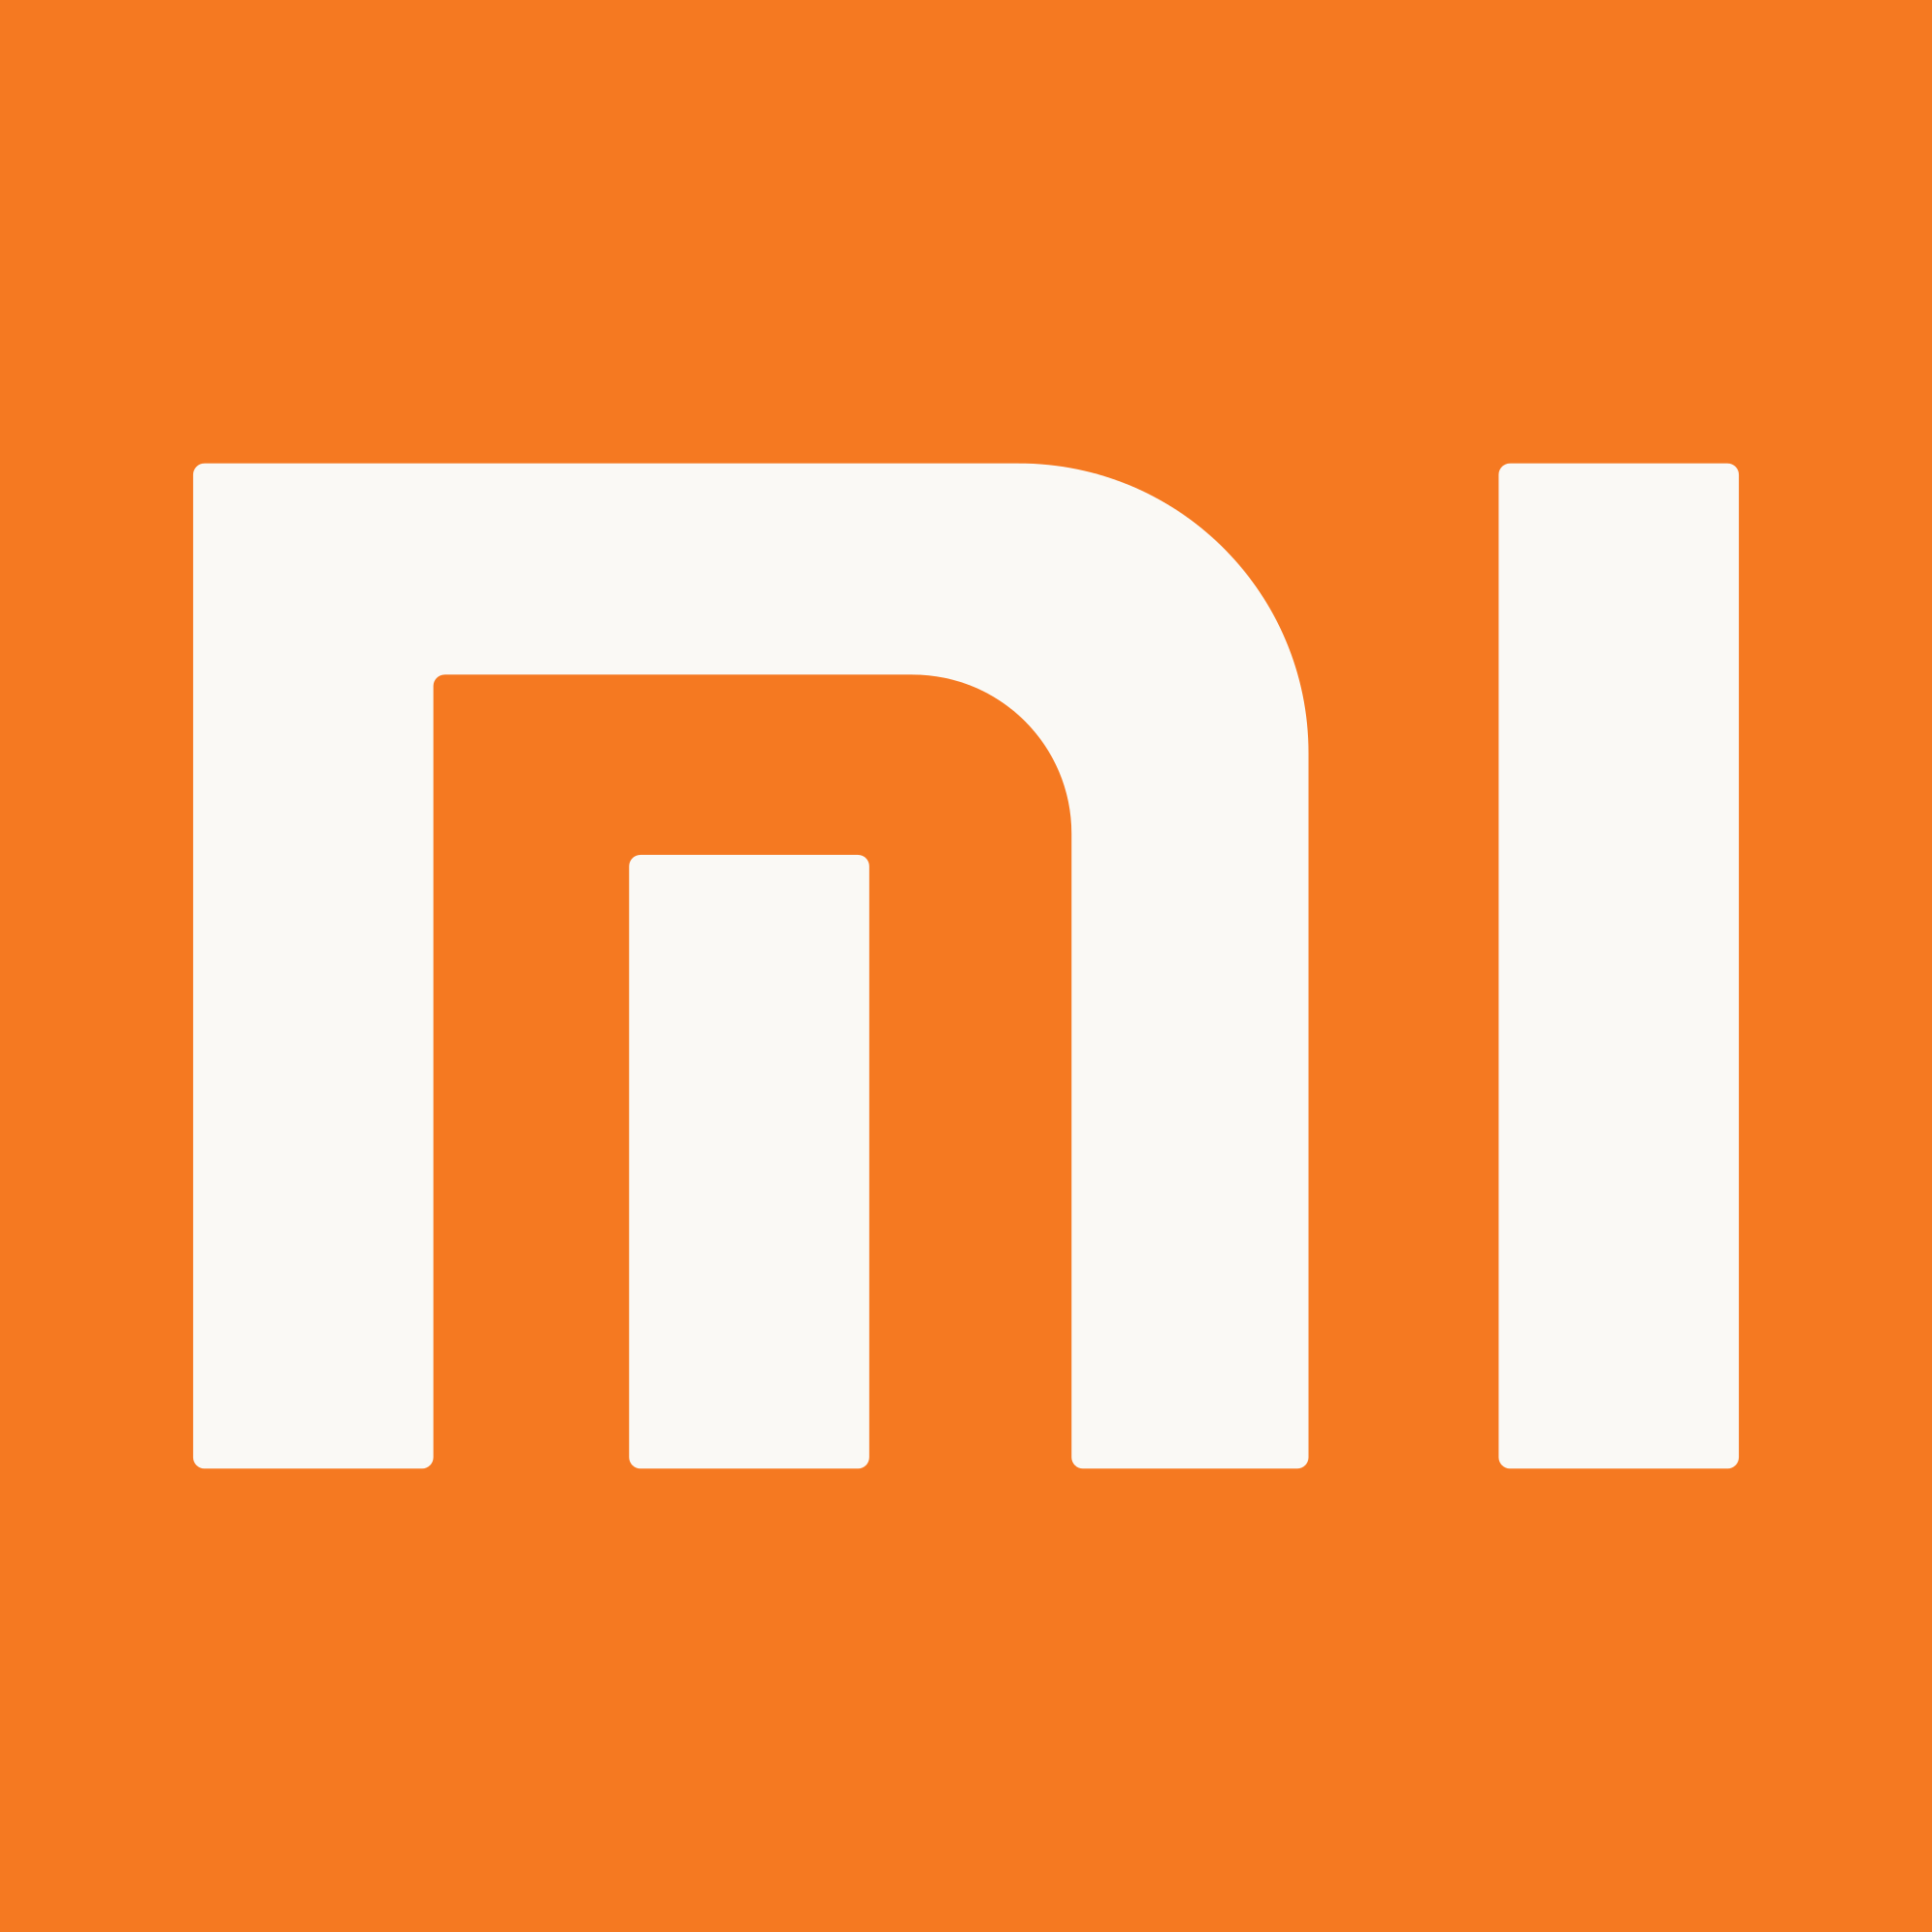 Xiaomi to sell smartphones in India through own portal